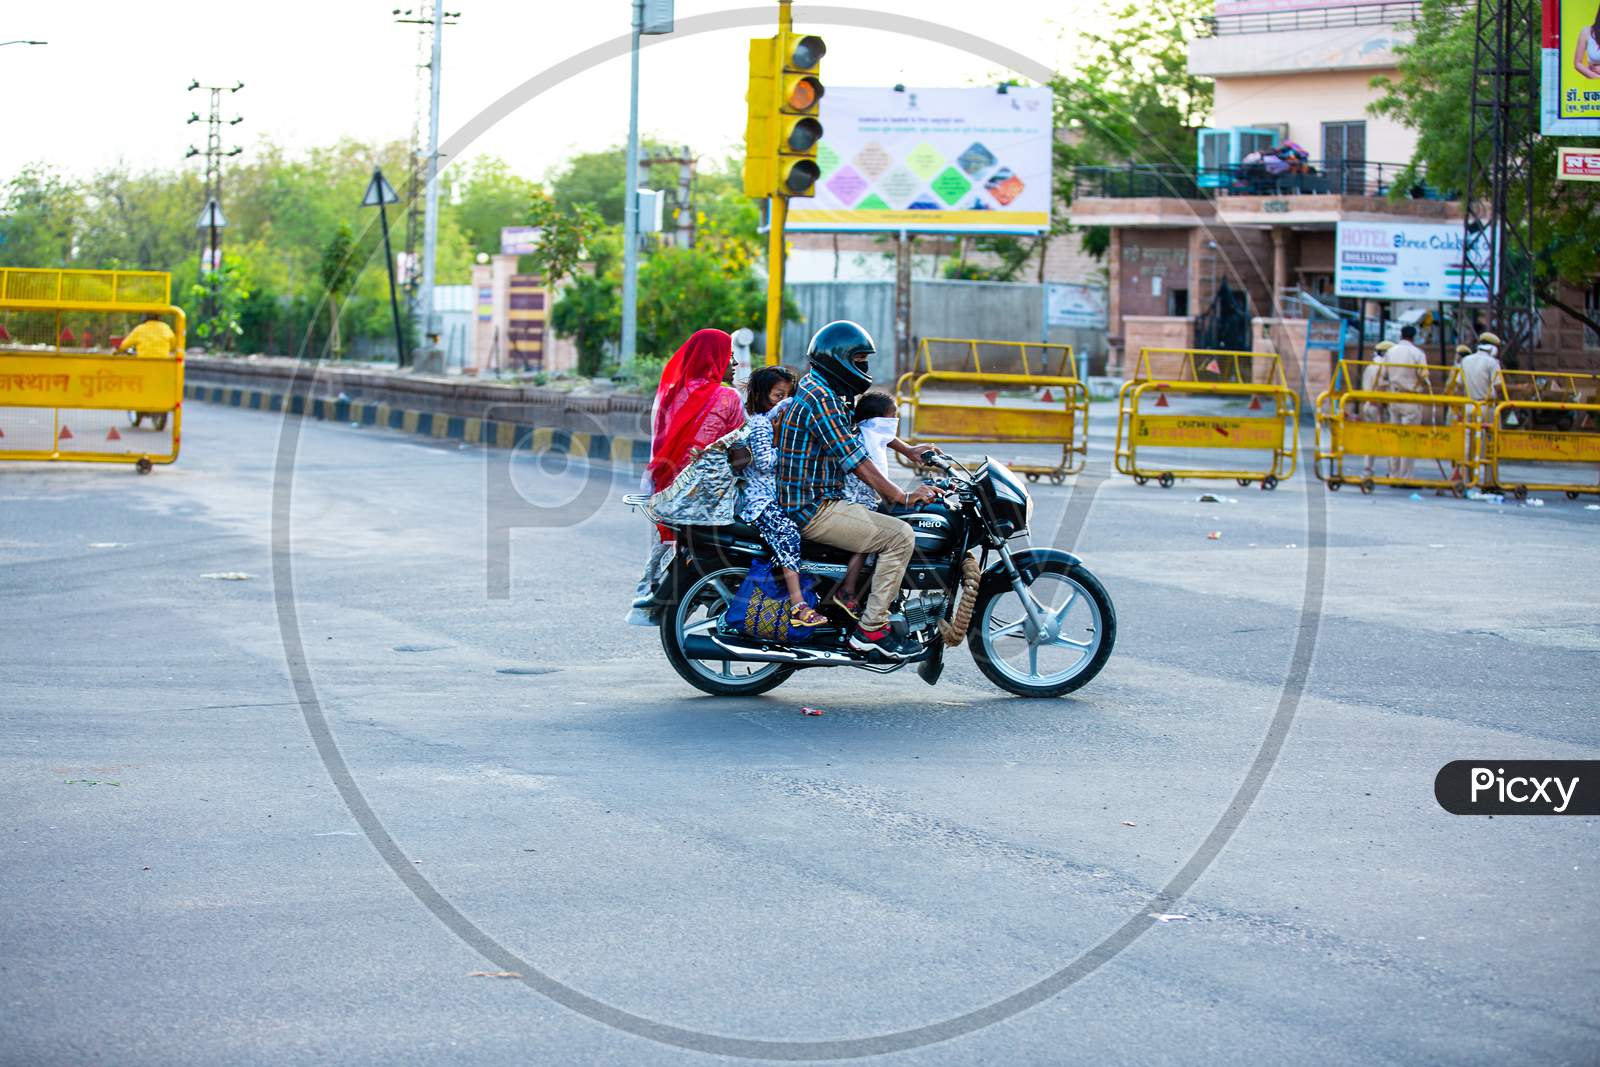 Jodhpur, Rajashtbn, India. 30 March 2020. People Wearing Masks On Vehicle Going One Place To Another, Coronavirus, Covid-19 Outbreak In India. Lockdown / Curfew Emergency In The Country.